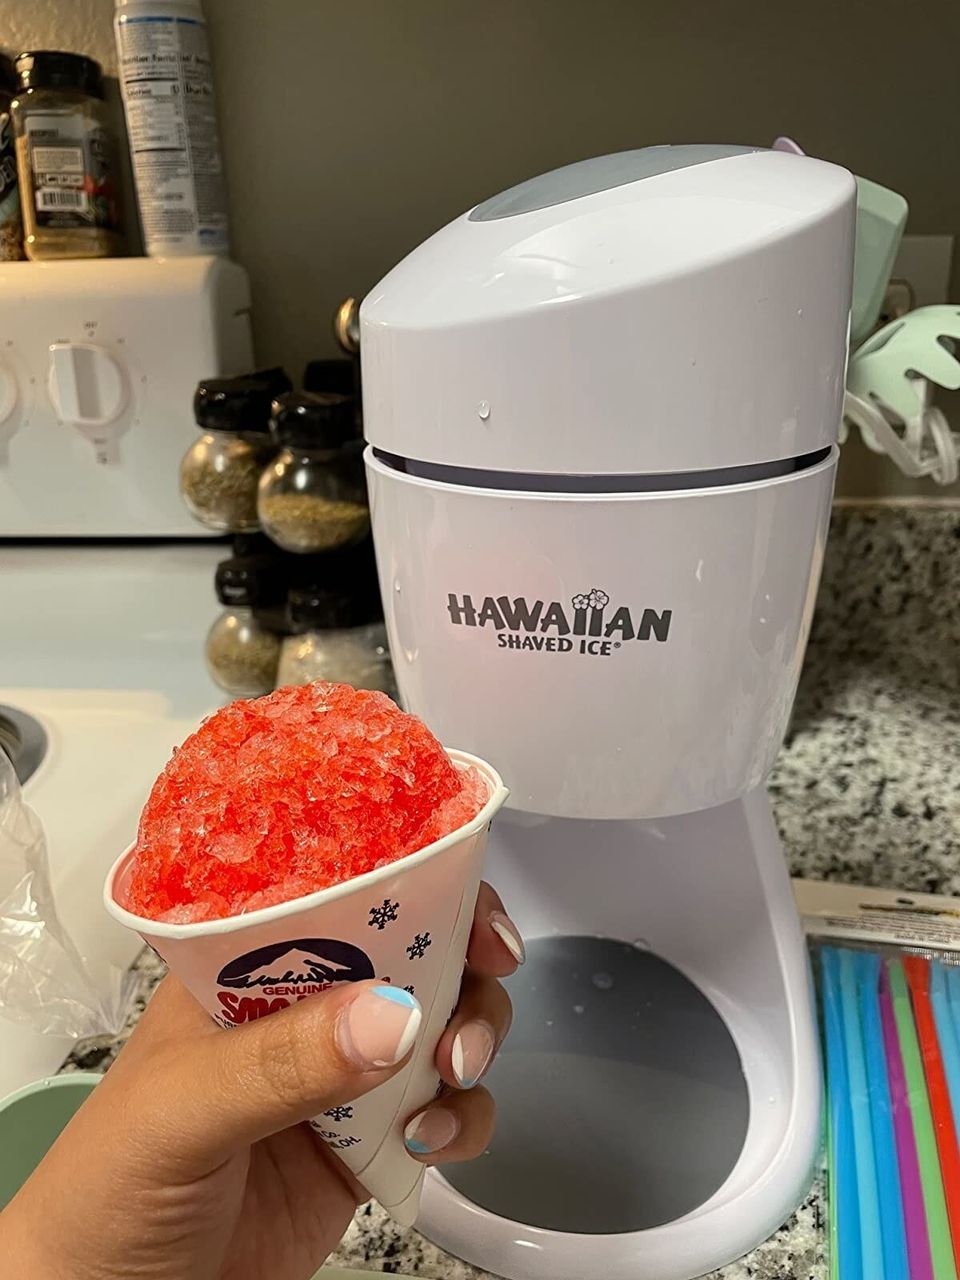 A snow cone machine because you're never too old to enjoy a childhood favorite. Make a bright-colored cup of iced goodness anytime the craving hits with this easy to use machine that comes with everything you need — flavored syrups, cups, molds, and more.